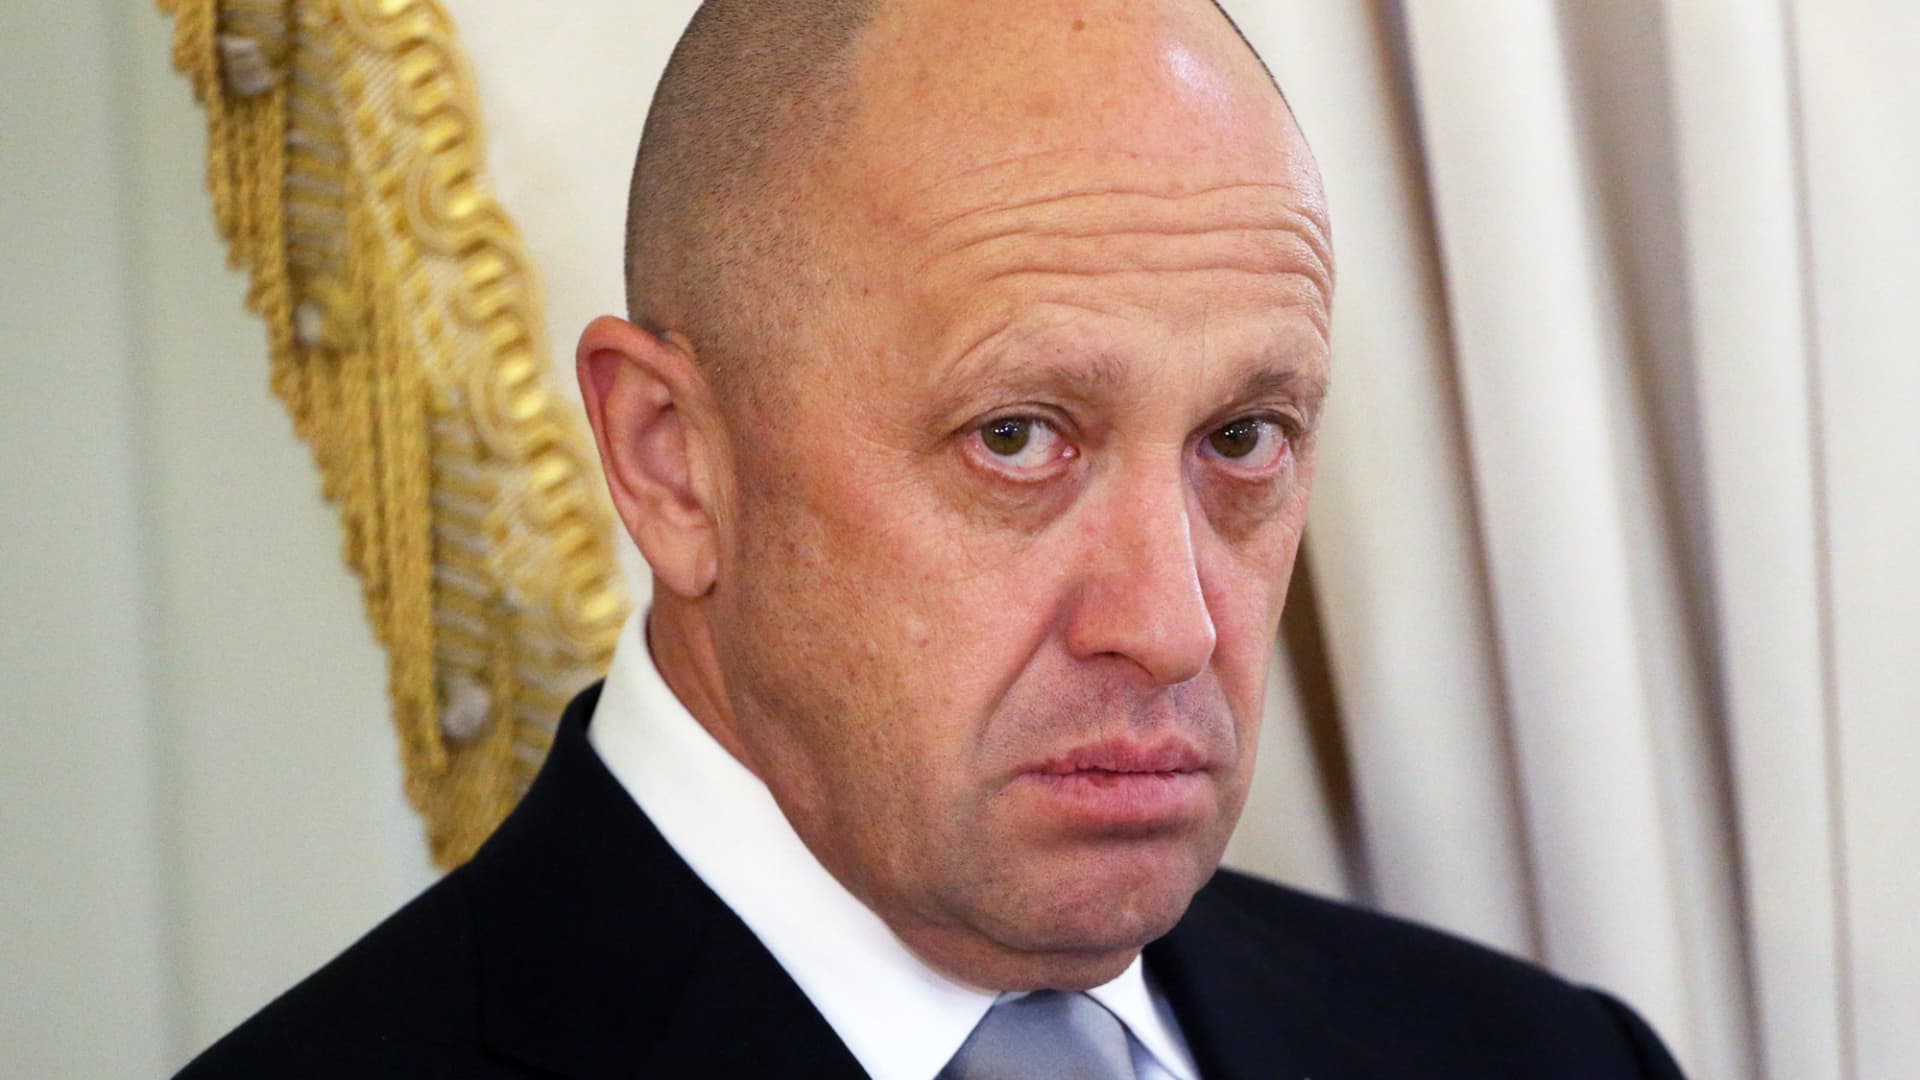 Yevgeny Prigozhin, a Russian businessman and close ally of Vladimir Putin. He recently admitted to creating the Wagner Group, a private military company fighting in Ukraine, in 2014.